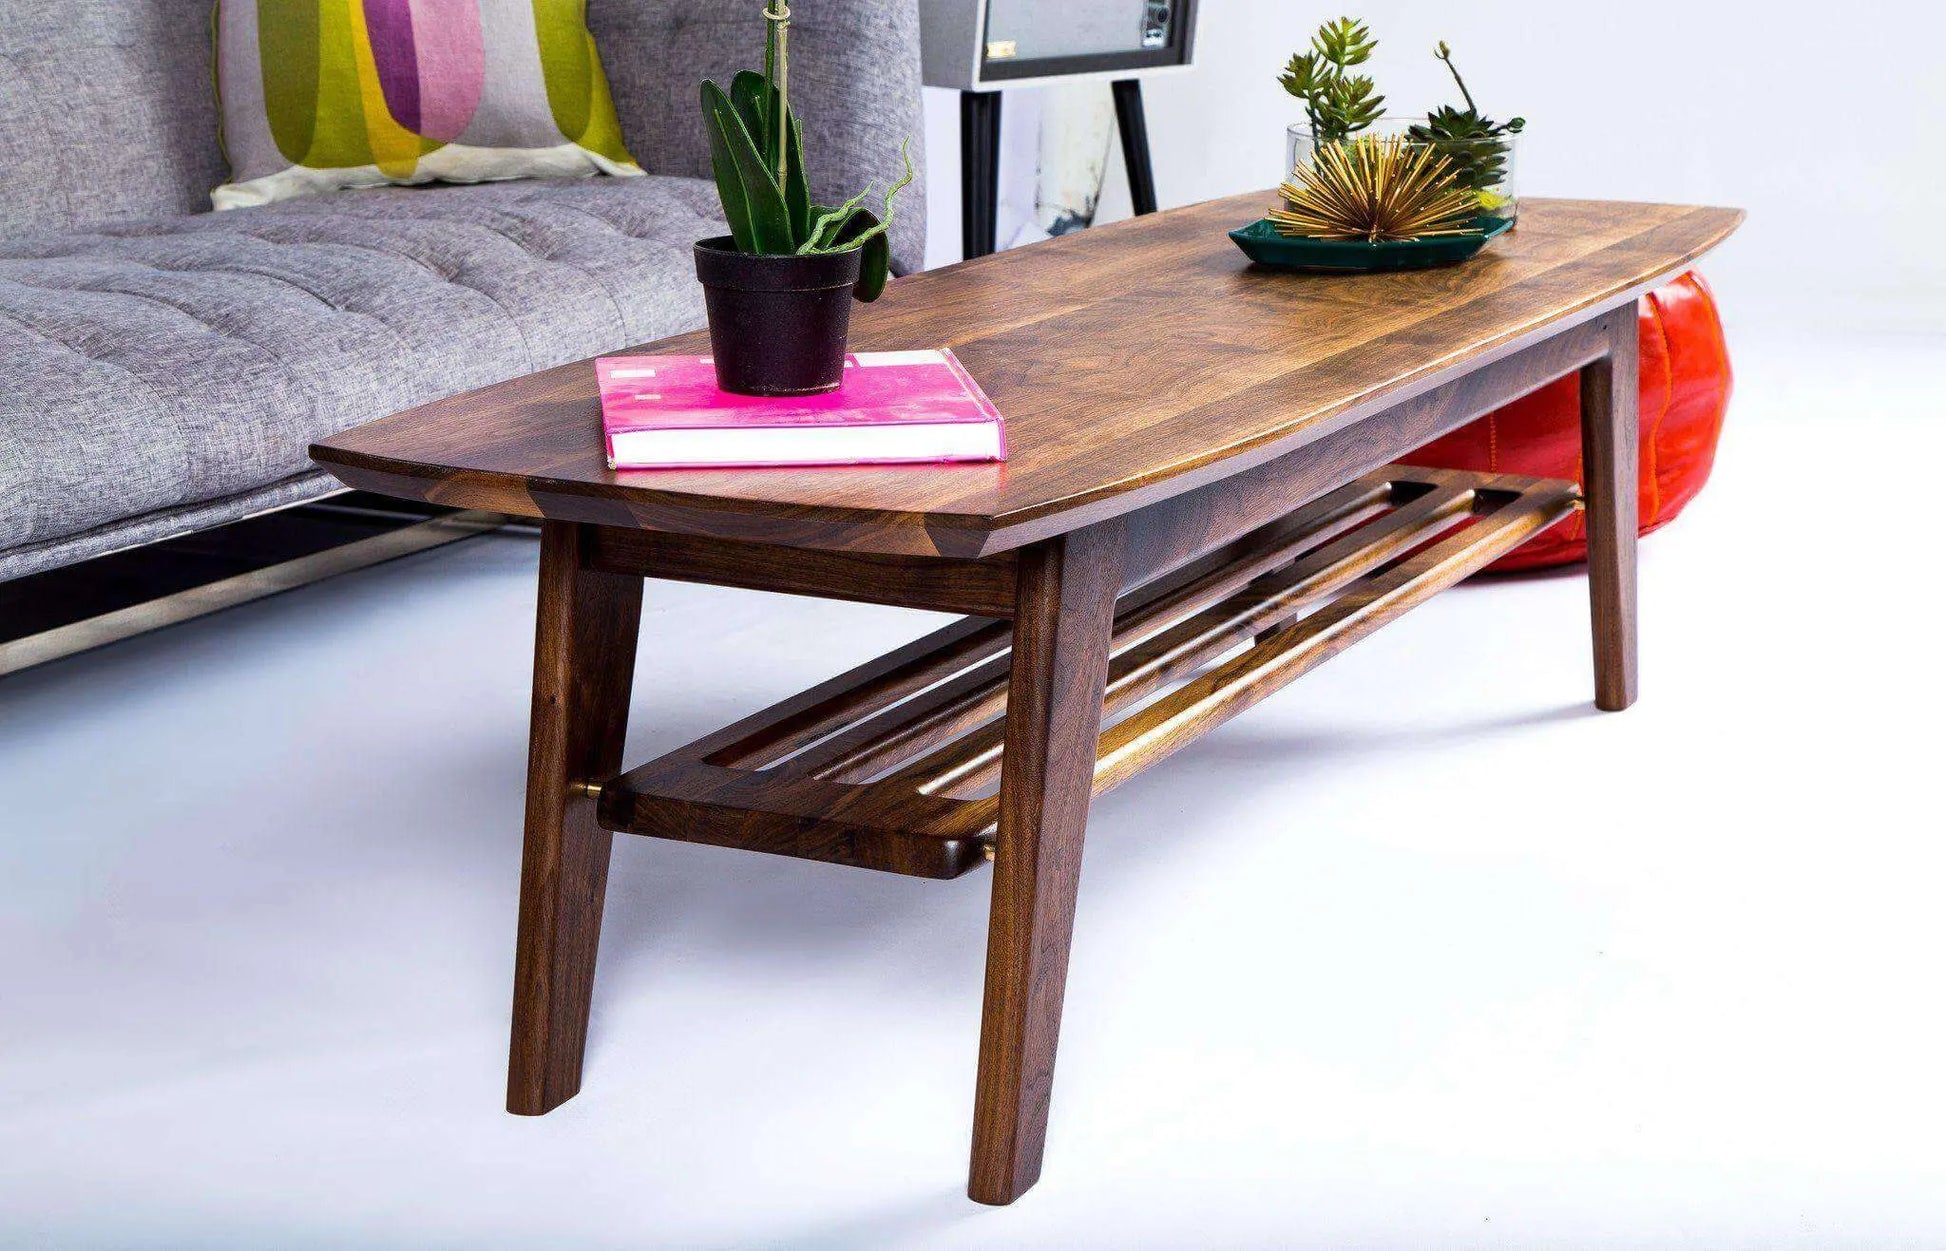 Moderncre8ve - The Soho - mid century oval coffee table